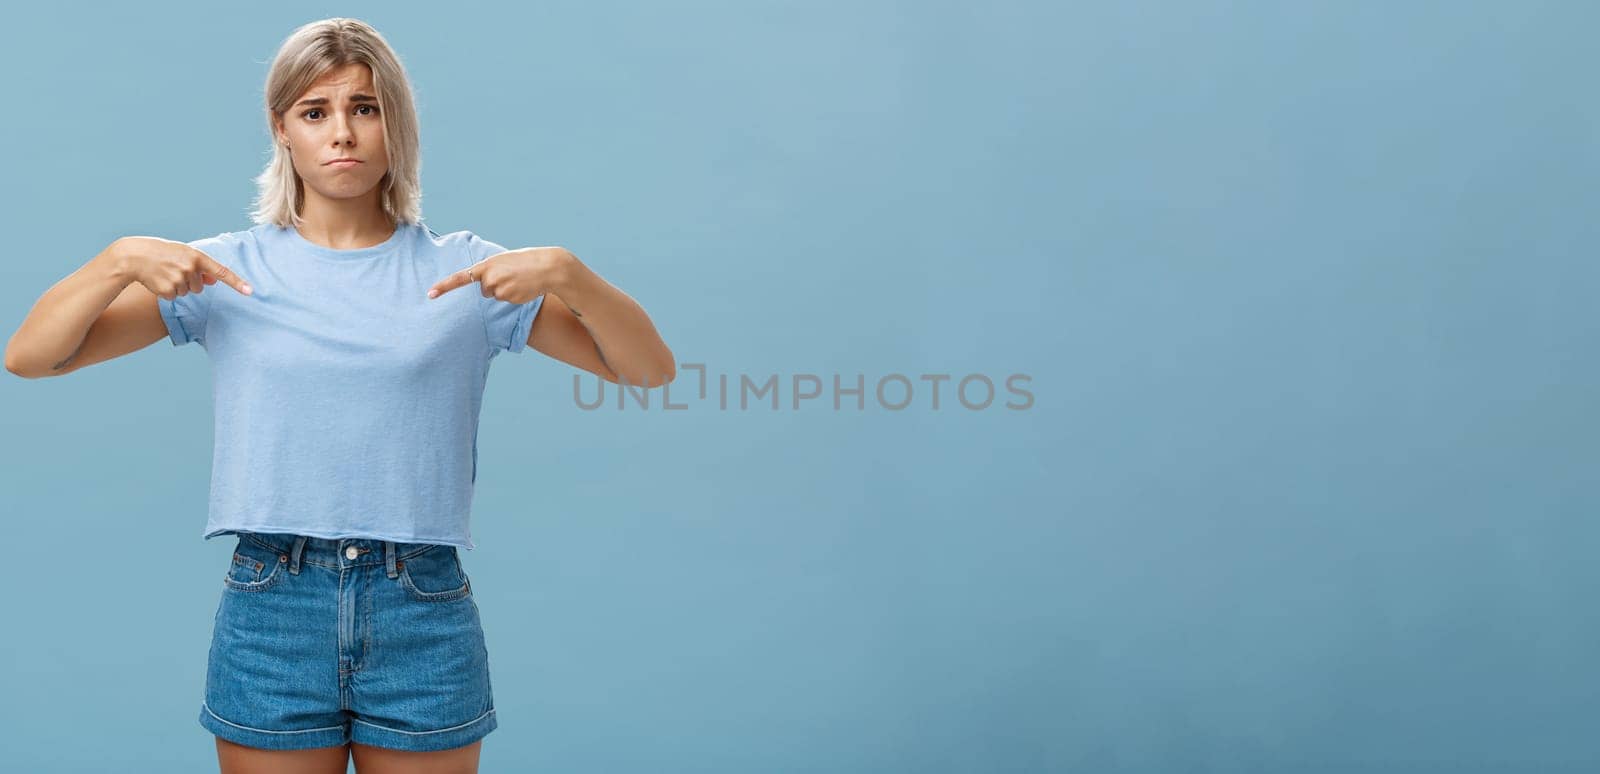 Sad cute blonde young female complaining being displeased with own body, pointing at breast frowning making gloomy smile pulling lips down from disappointment standing over blue background.